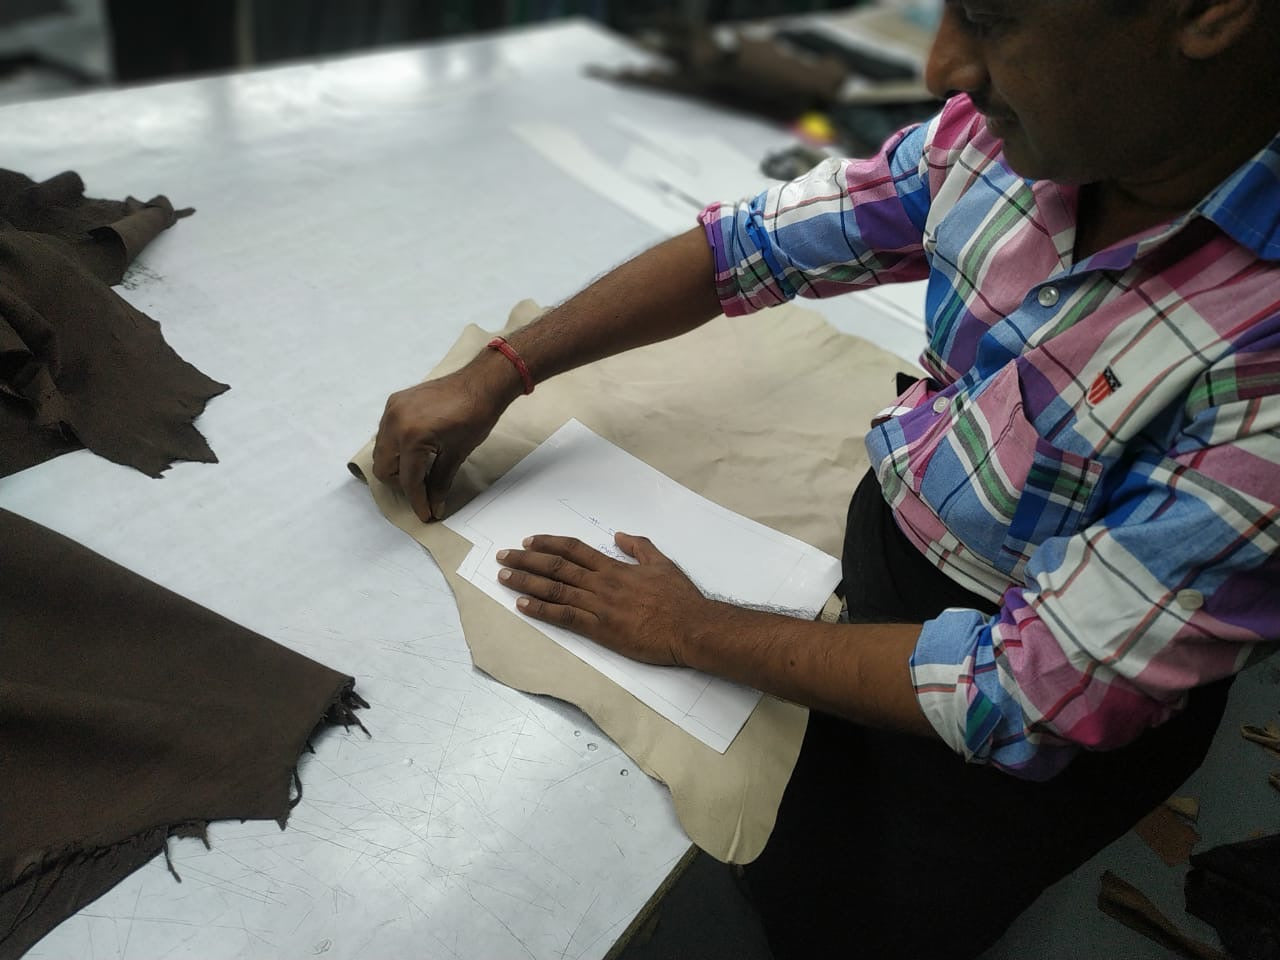 Man working on leather